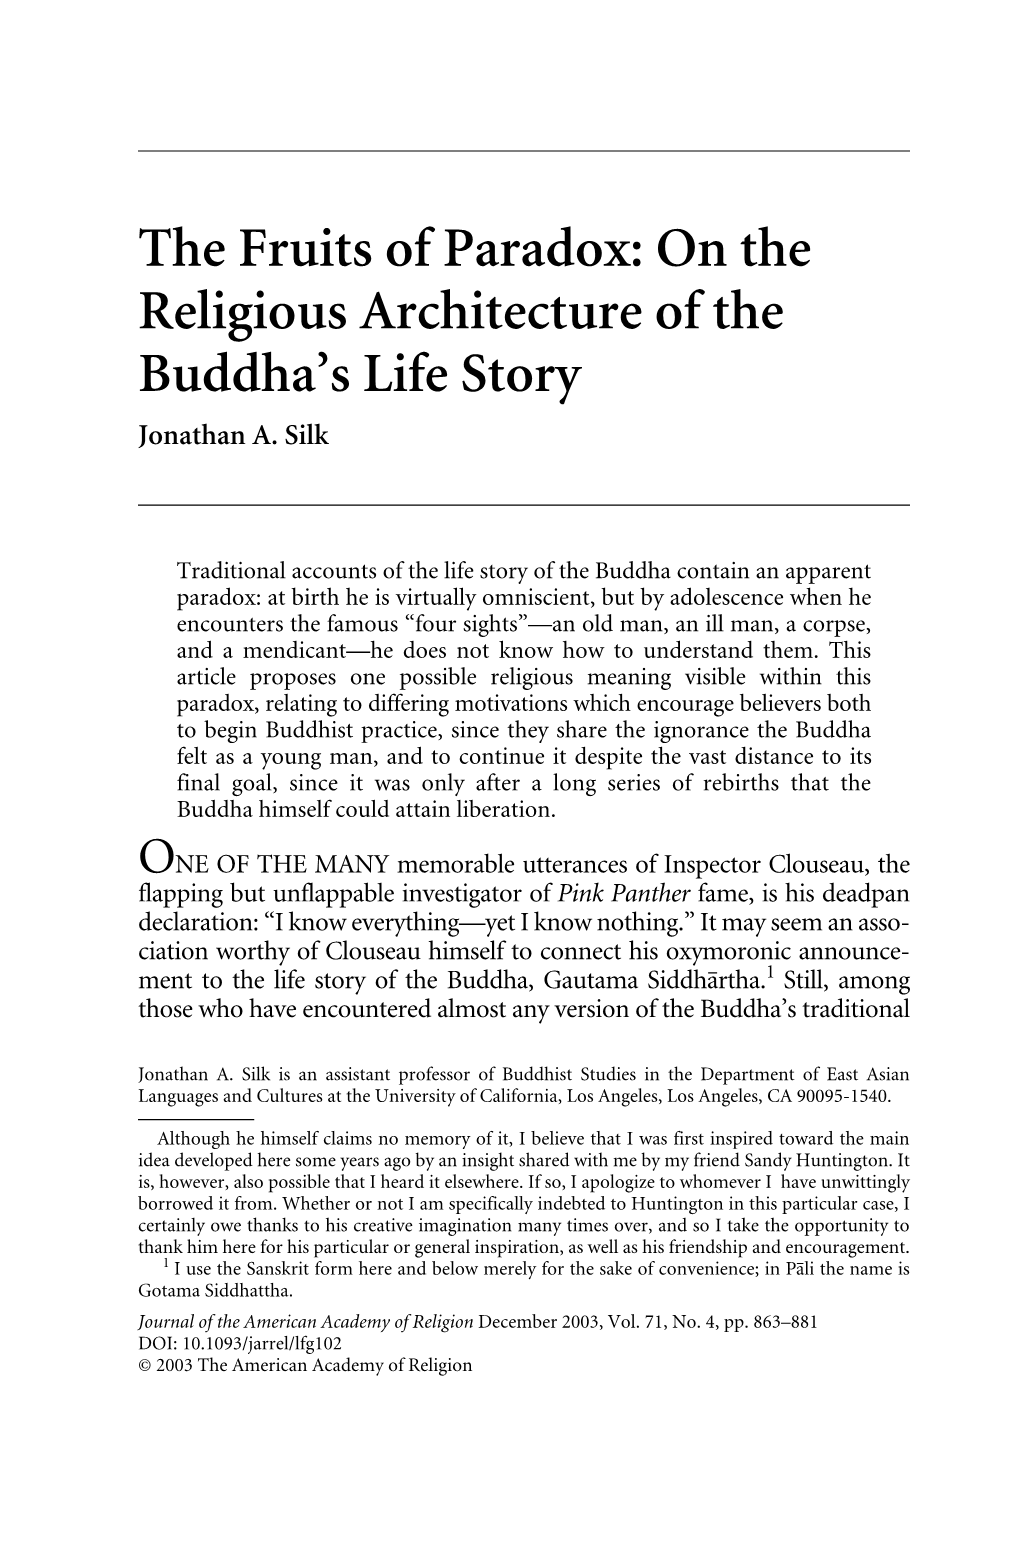 The Fruits of Paradox: on the Religious Architecture of the Buddha's Life Story